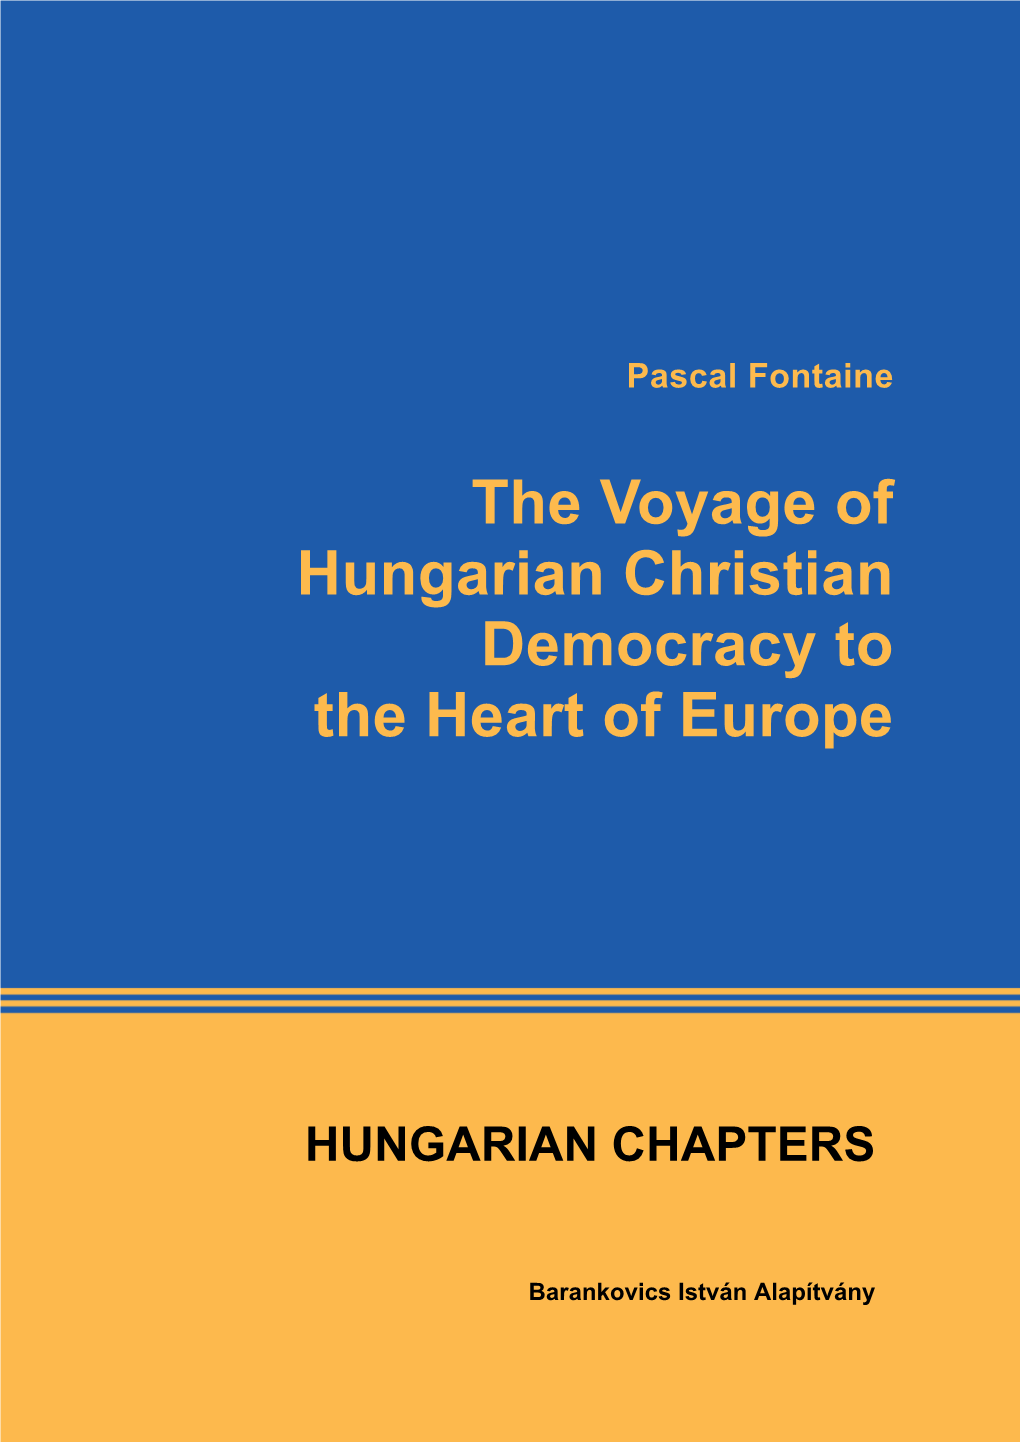 The Voyage of Hungarian Christian Democracy to the Heart of Europe